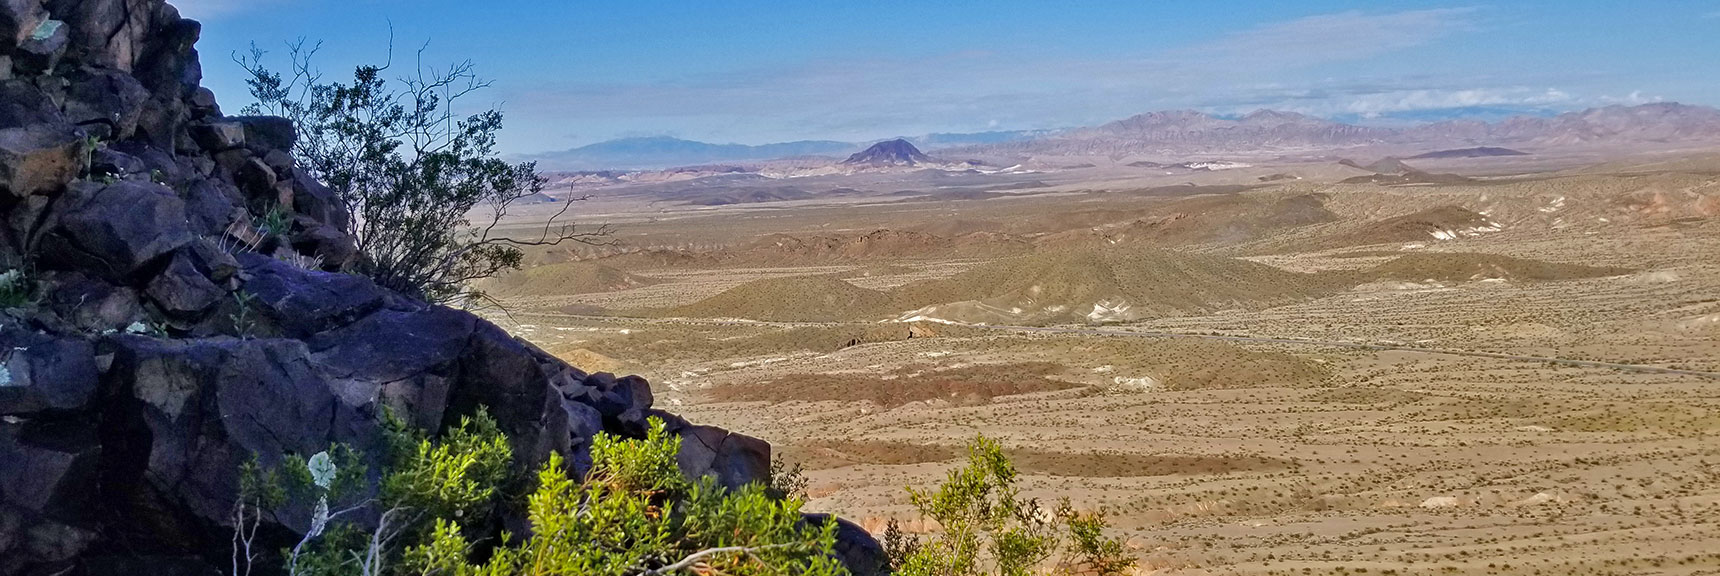 View While Ascending North Western Side of Black Mesa in Lake Mead National Recreation Area, Nevada